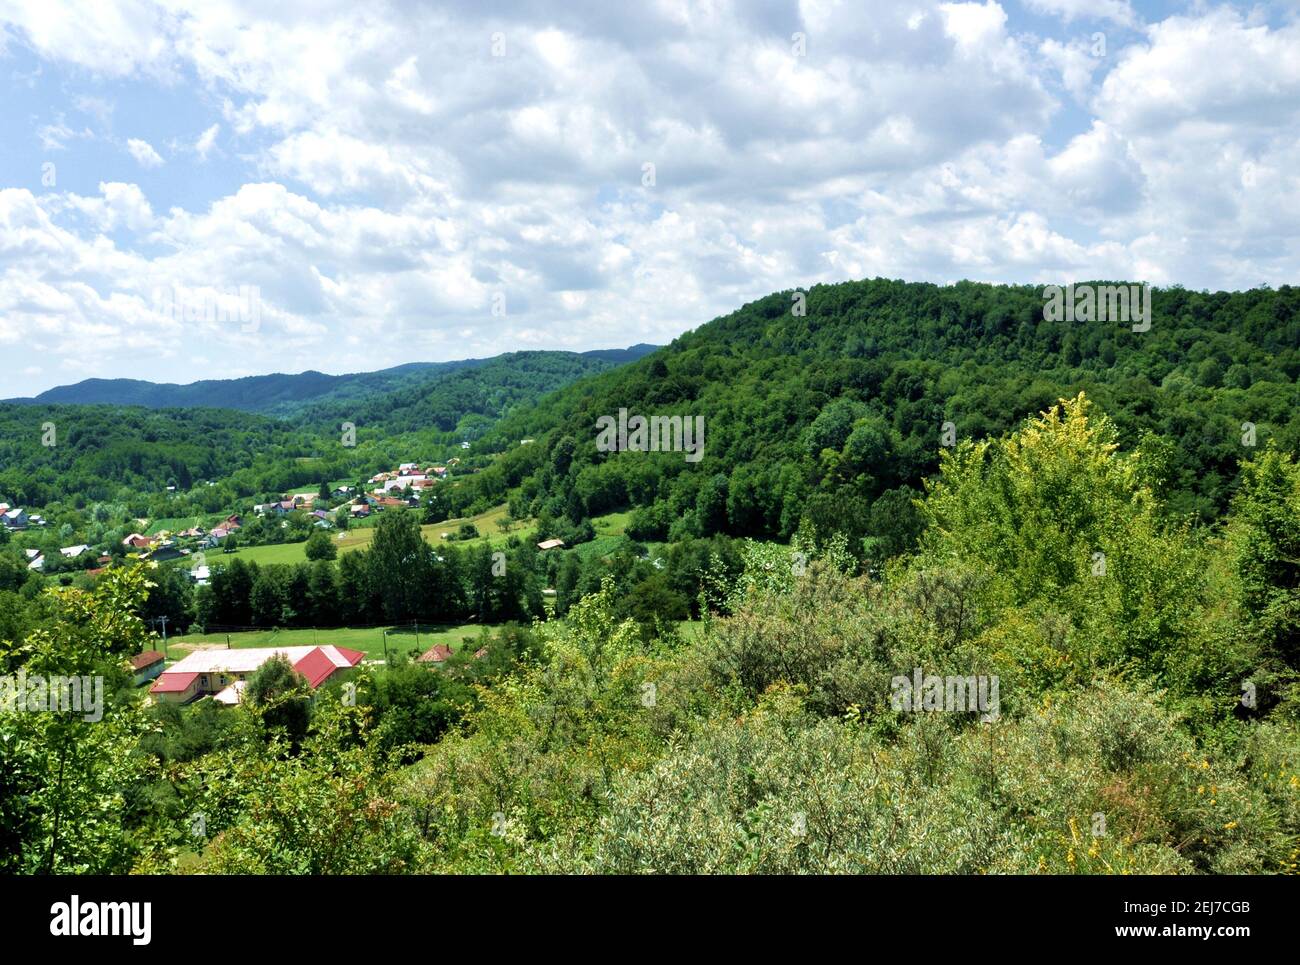 Scenic landscape of rural area in Romania, with hills and houses on a cloudy sky background Stock Photo